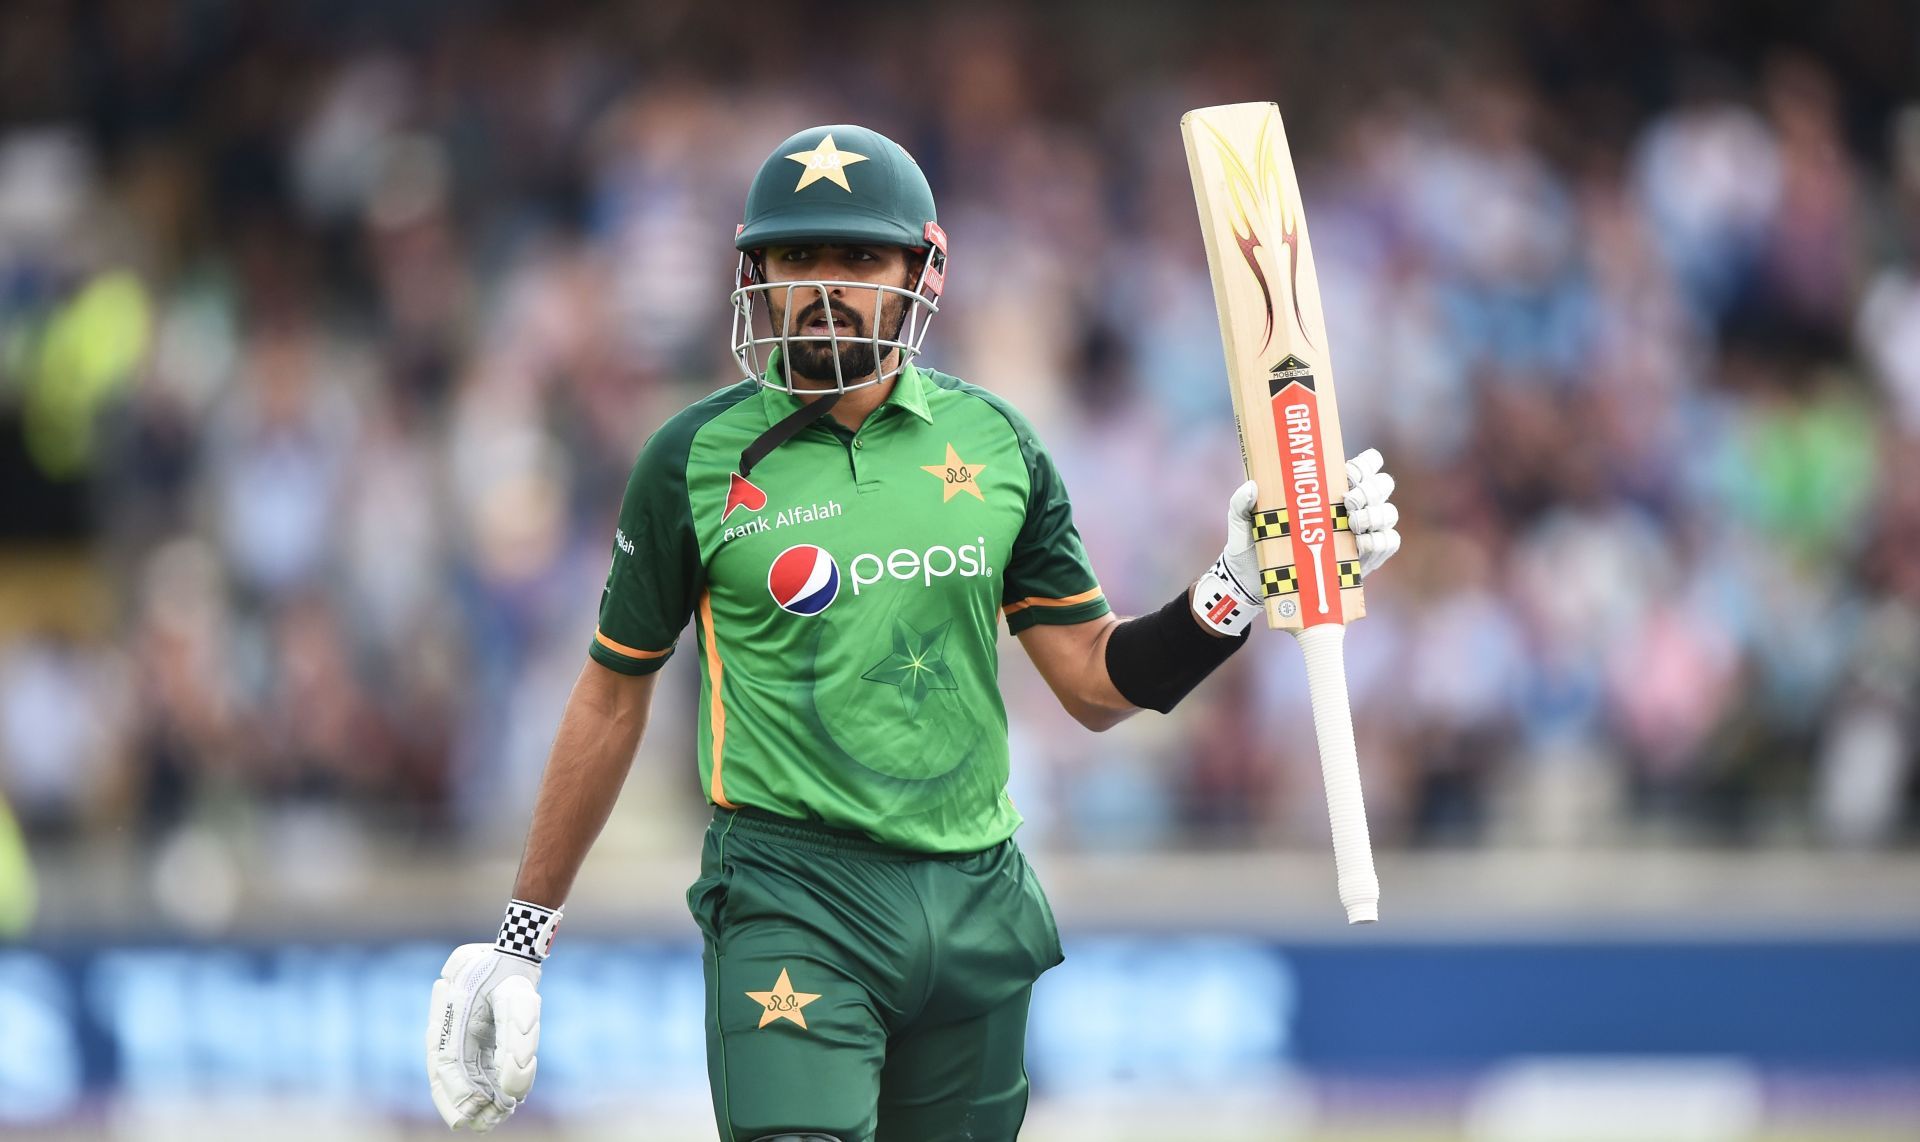 Babar Azam will lead Pakistan at the T20 World Cup